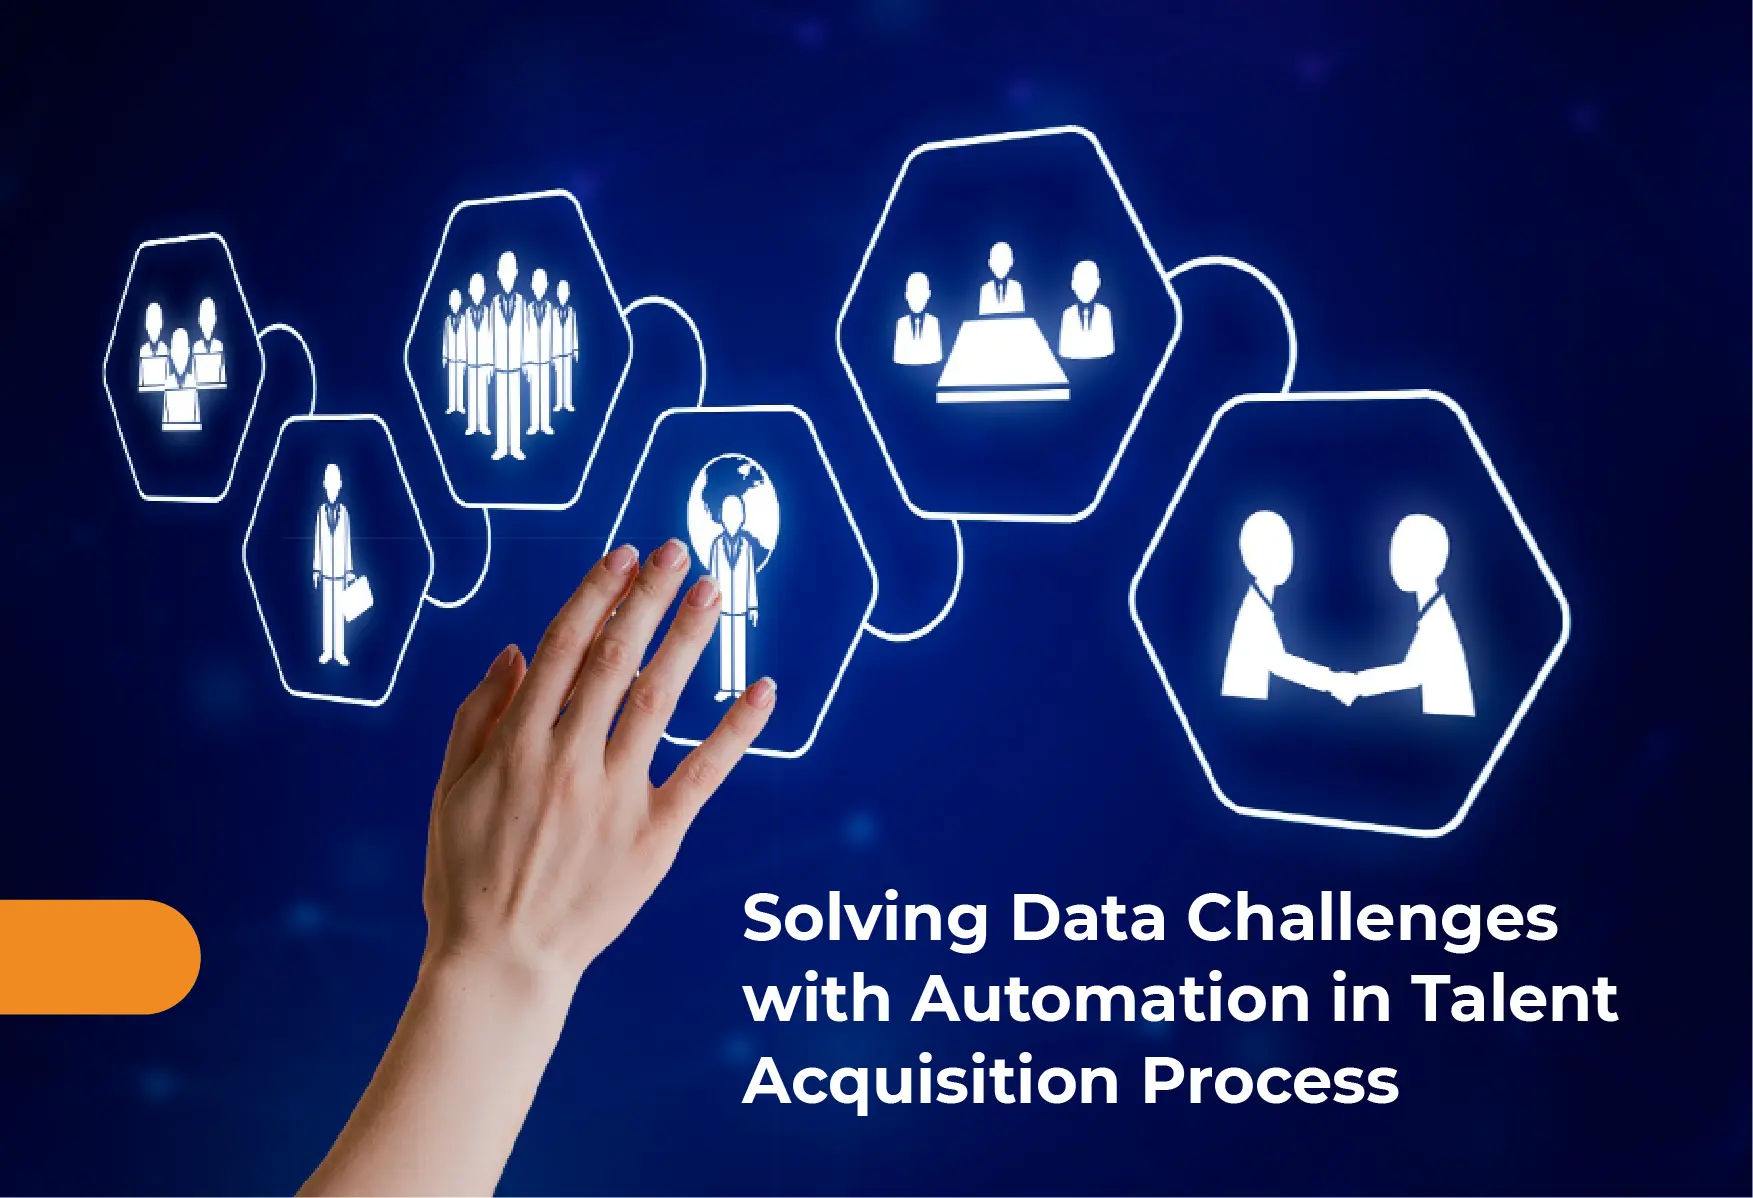 Solving Data Challenges with Automation in Talent Acquisition Process